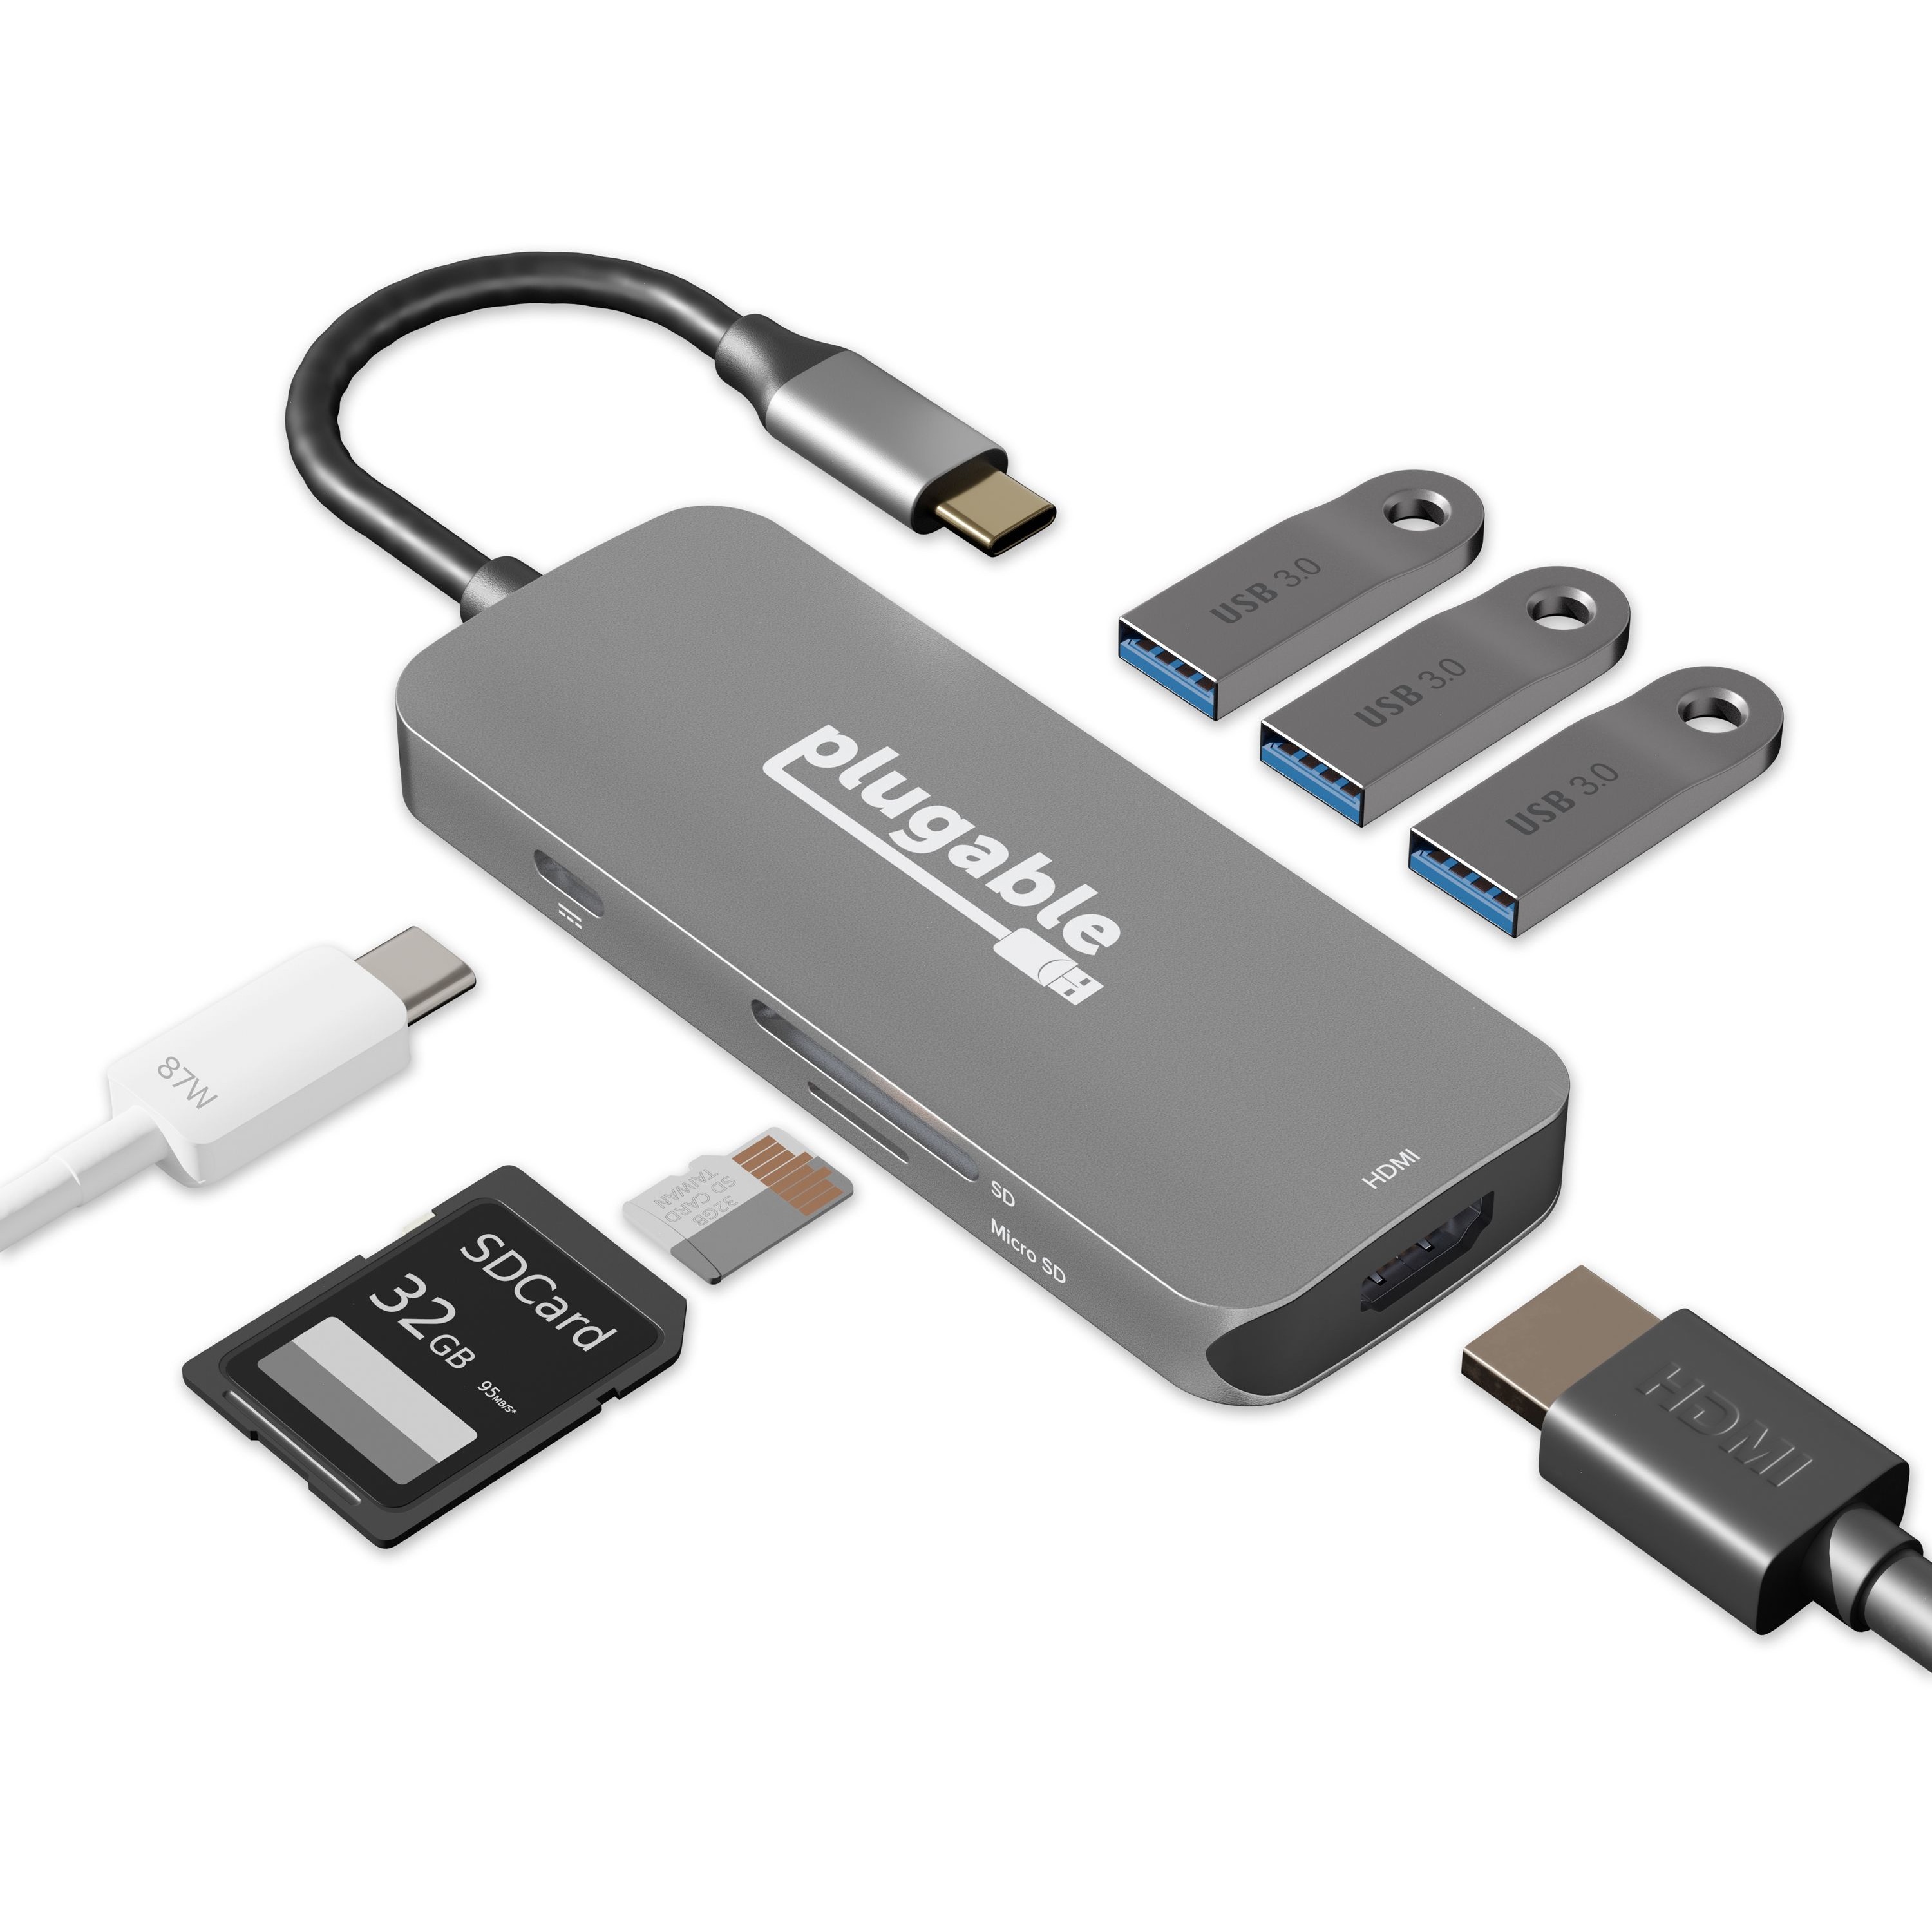 Plugable USB C Triple Display Docking Station with Laptop Charging, for  Thunderbolt, USB4, or USB C Systems, Compatible with Windows, macOS,  ChromeOS